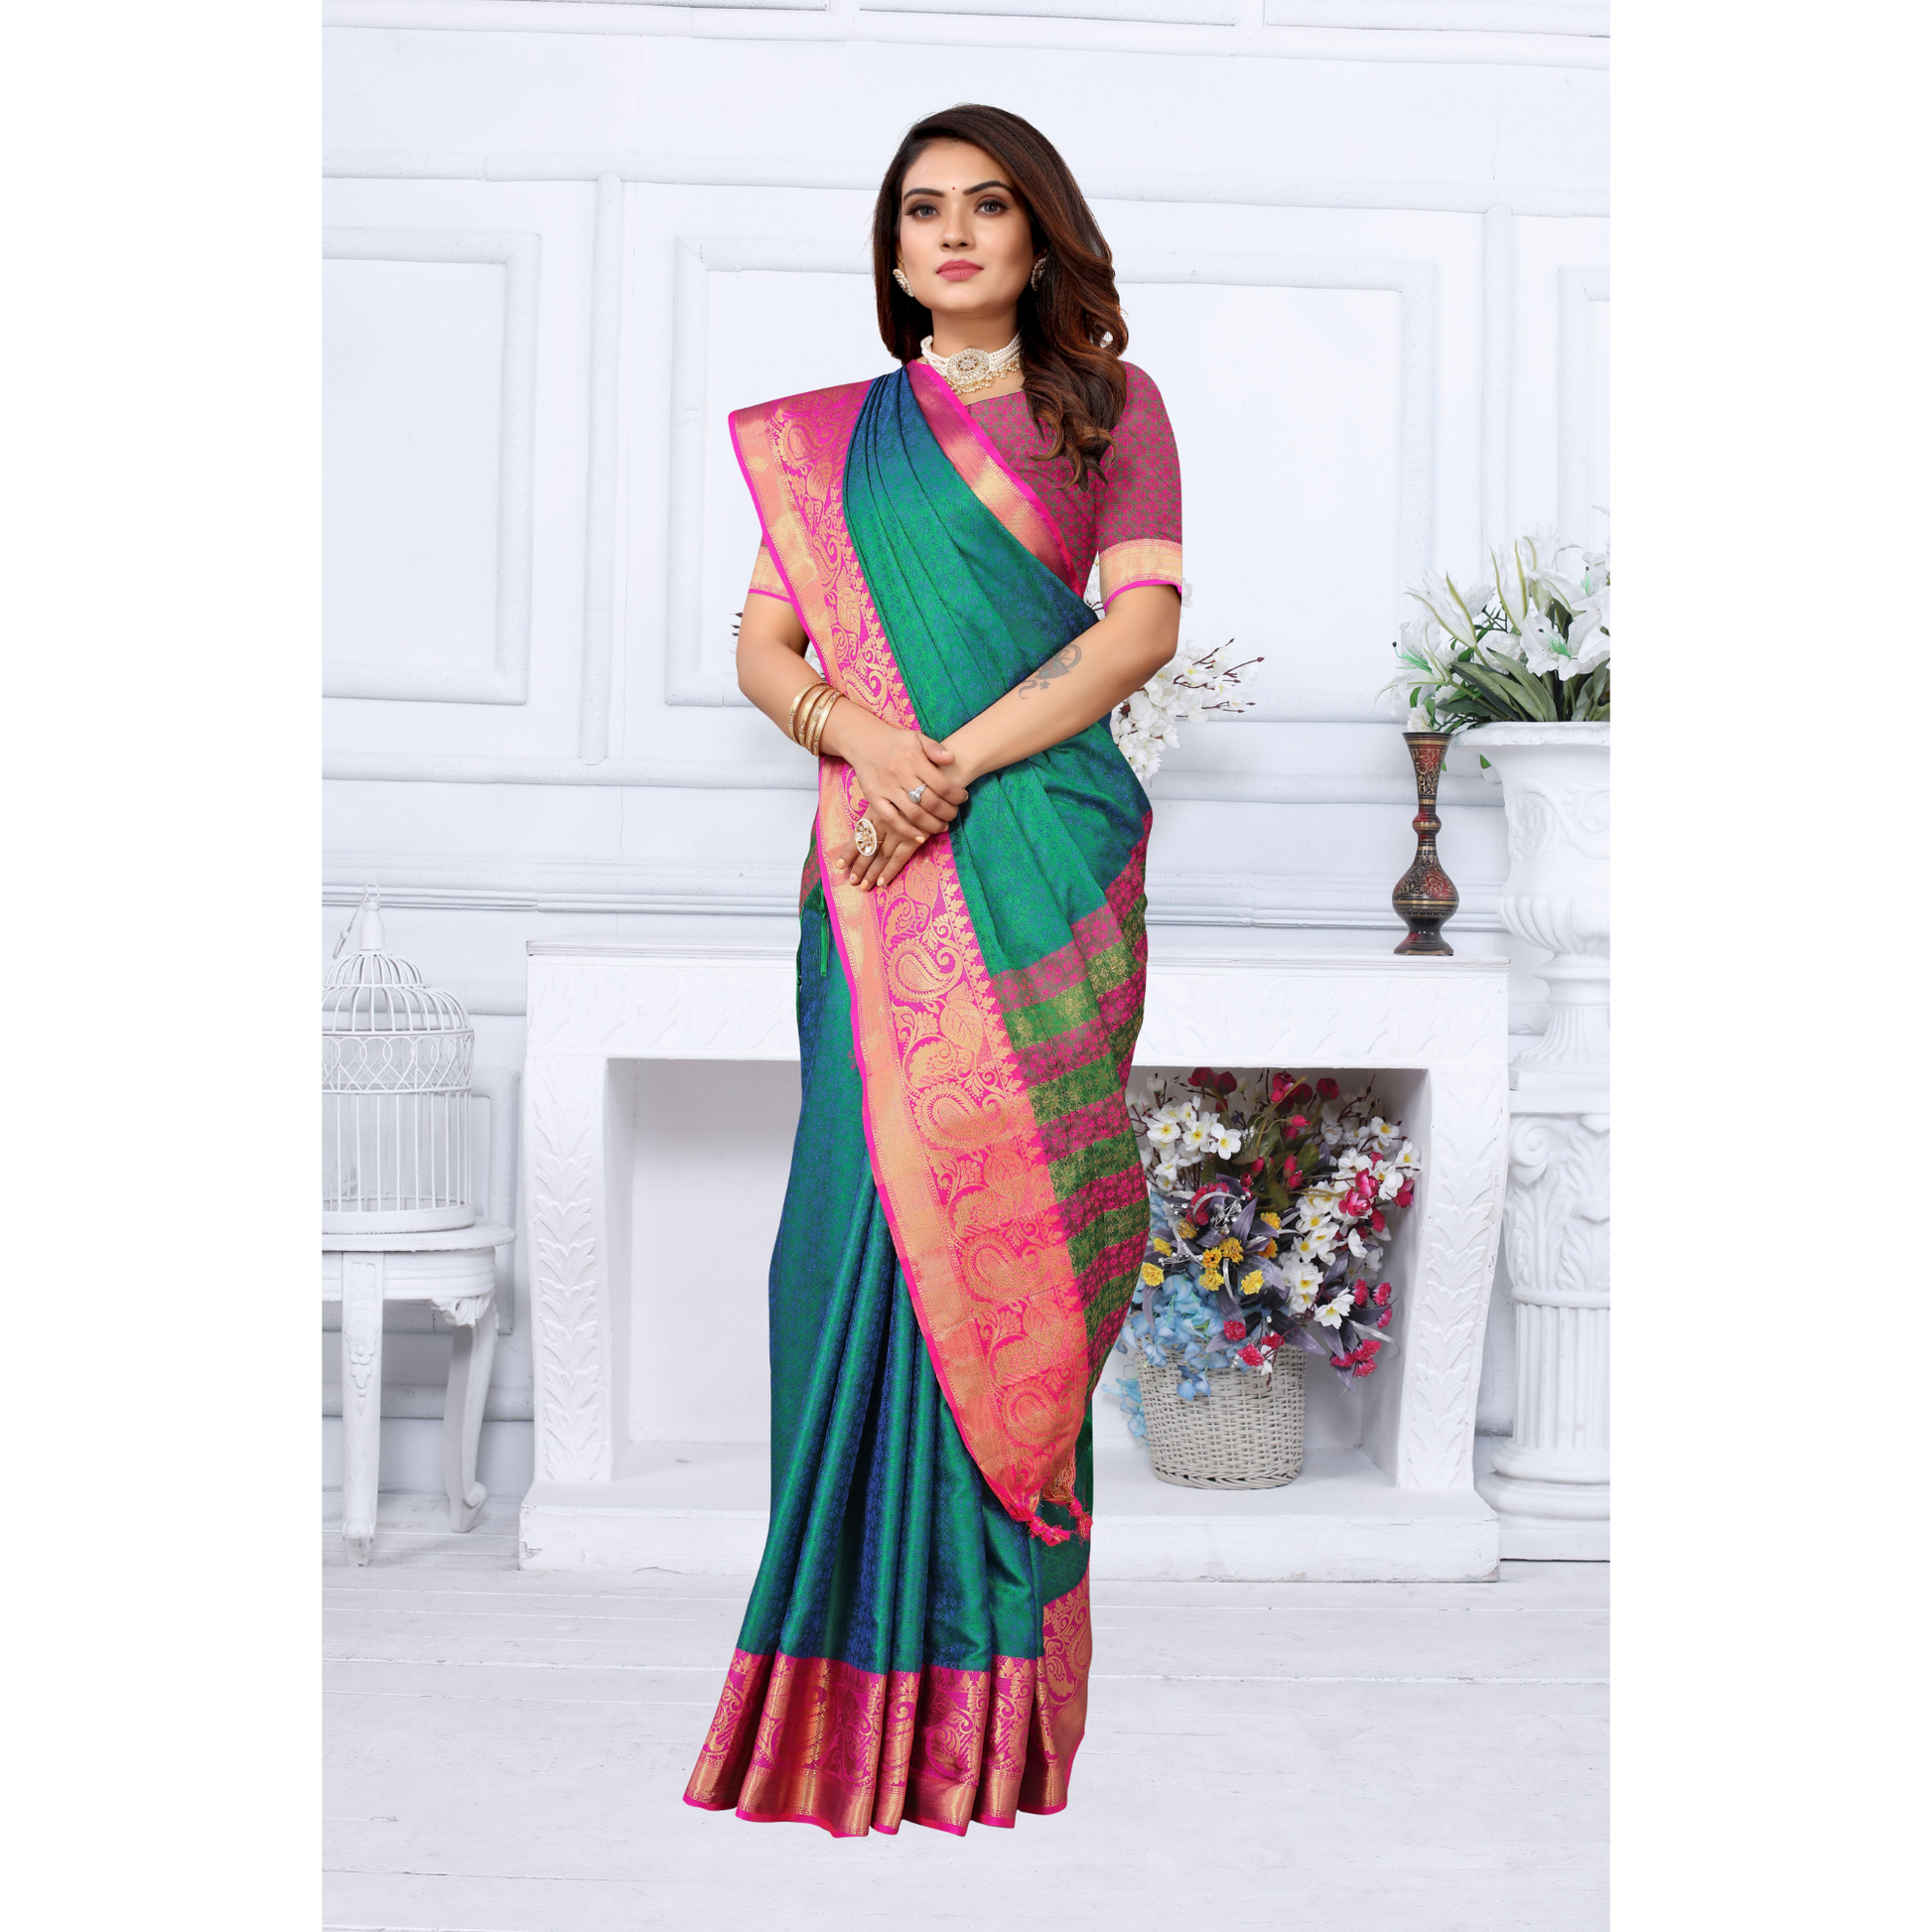 Silk and Cotton Jacquard Saree with Silk and Cotton Blouse Piece Green with red border Saree casual Cocktail Festive Green red Saree Saree Silk img21_72701c90-d44e-41ea-8f59-0d55a68e754c